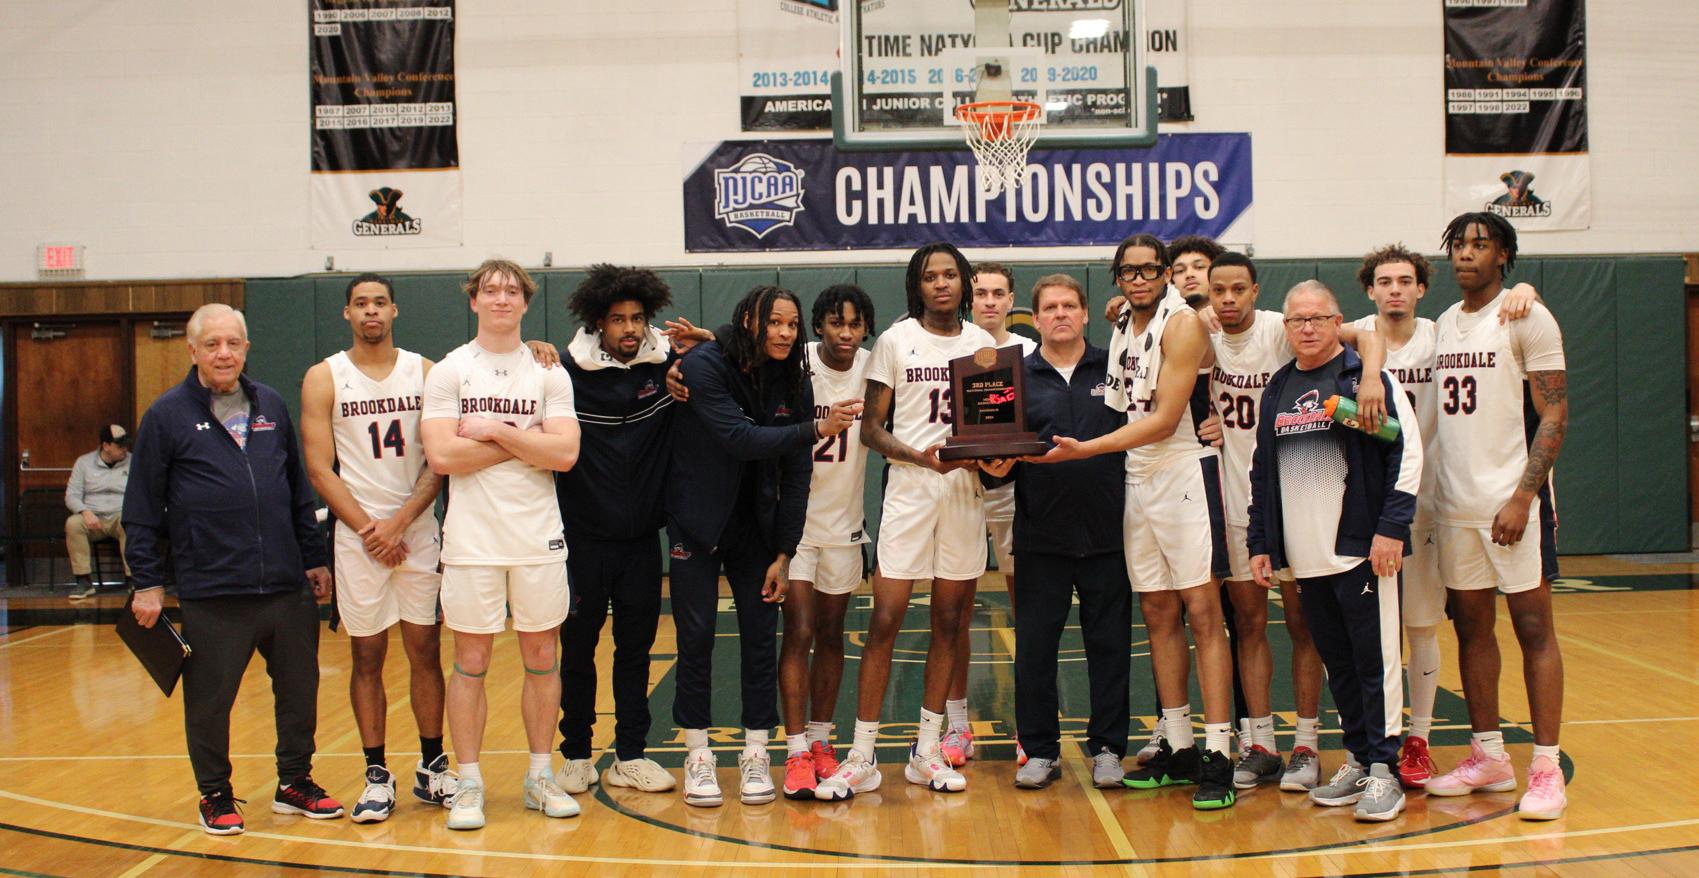 Brookdale Men's Basketball Finishes 3rd At Nationals After Defeating Riverland CC